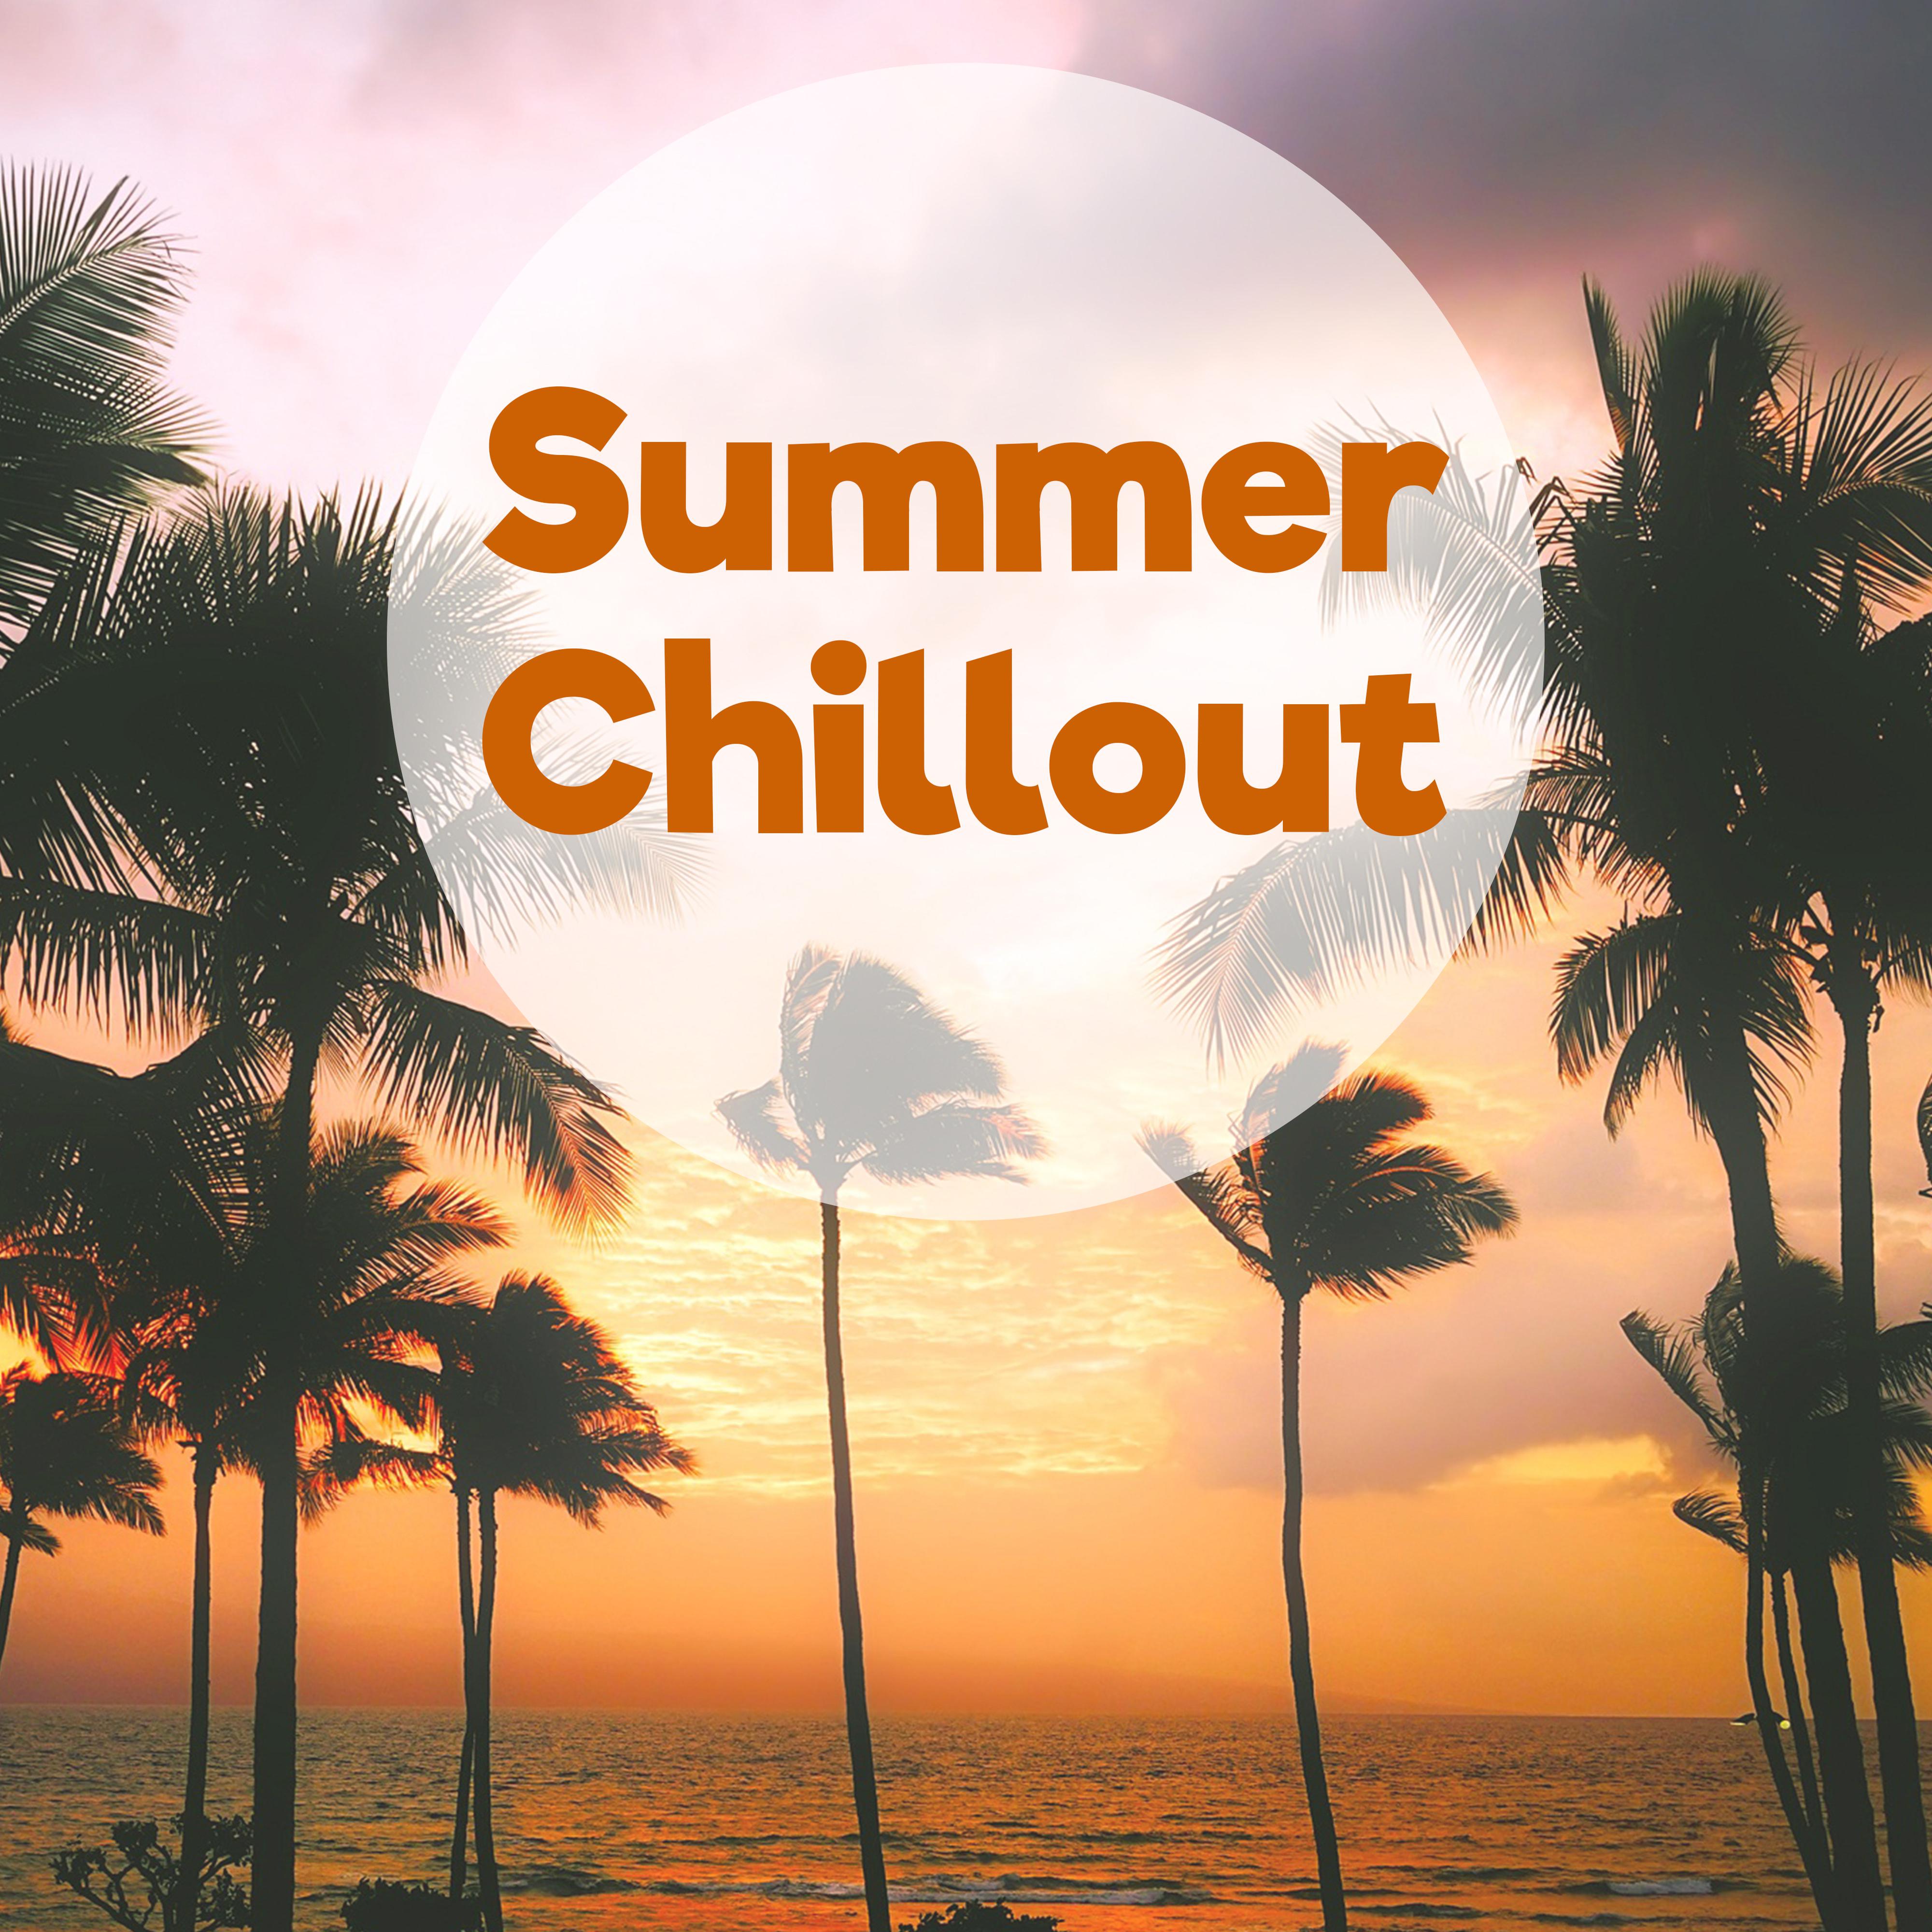 Summer Chillout – Chill Out Music, Relax on Holiday, Drinkbar Music